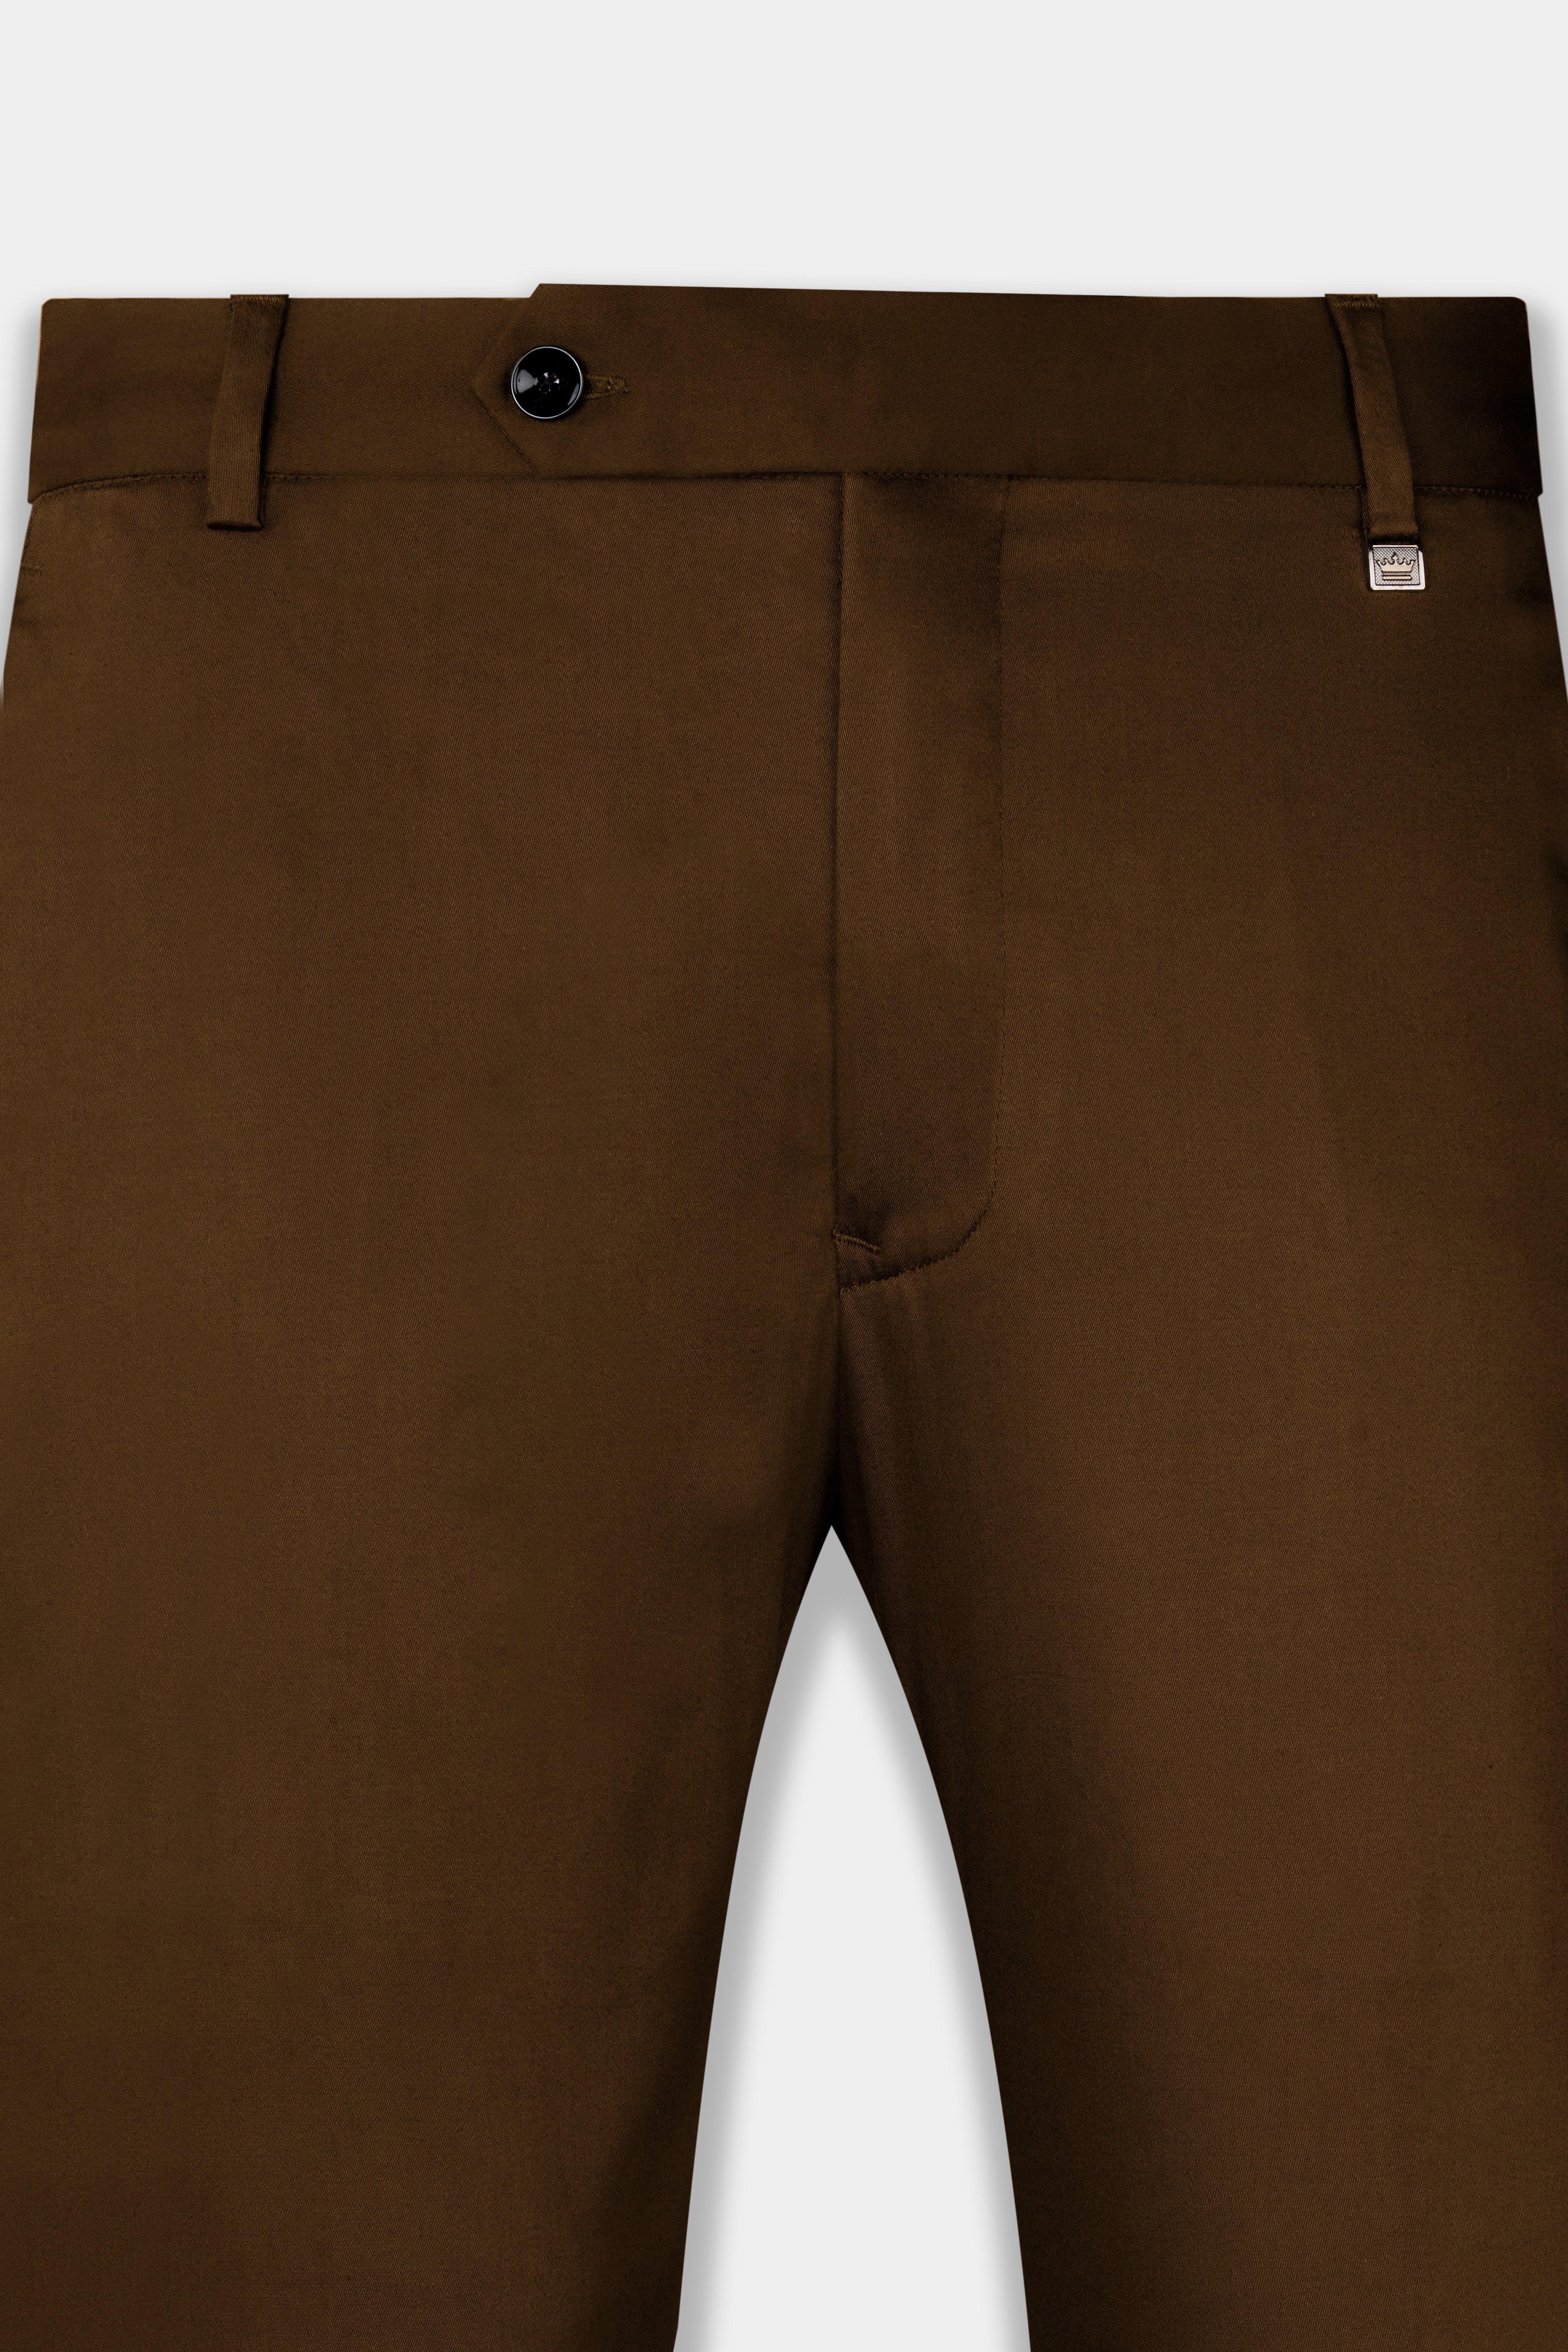 Metallic Bronze Brown Double Breasted Premium Cotton Stretchable Traveler Suit ST2778-DB-36,ST2778-DB-38,ST2778-DB-40,ST2778-DB-42,ST2778-DB-44,ST2778-DB-46,ST2778-DB-48,ST2778-DB-50,ST2778-DB-52,ST2778-DB-54,ST2778-DB-56,ST2778-DB-58,ST2778-DB-60